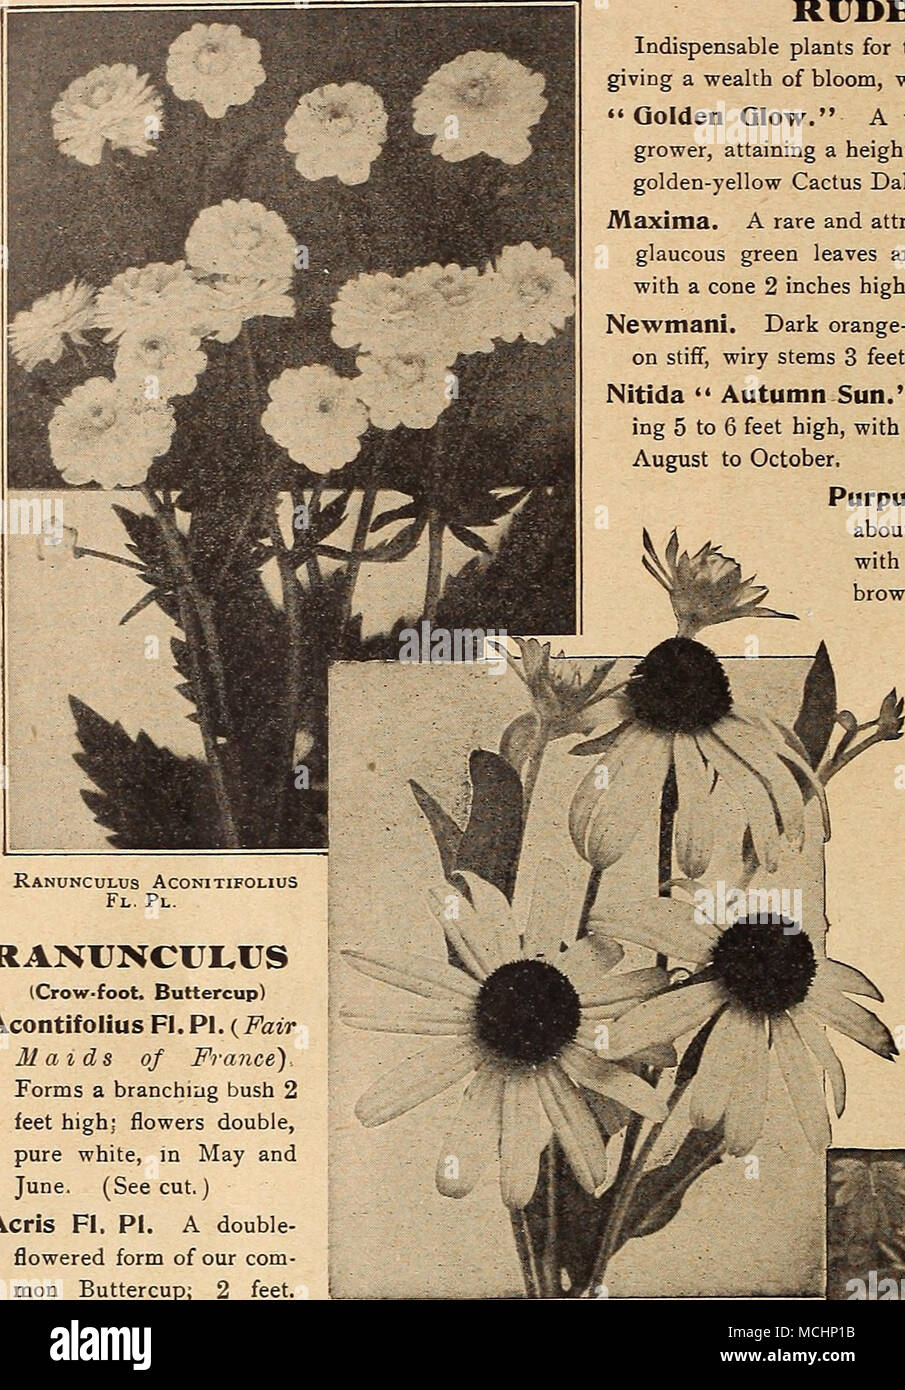 . RANUNCULUS (Crow-foot. Buttercup) Acontifolius Fl. PI. (Fair Maids of France). Forms a branching bush 2 feet high; flowers double, pure white, in May and June. (See cut.) Acris Fl. PI. A double- flowered form of our com- mon Buttercup; 2 feet. May and June. 25 cts. each; $2.50 per doz. RUDBECKIA (Cone-flower) Indispensable plants for the hardy border; grow and thrive anywhere, giving a wealth of bloom, which are well suited for cutting. &quot; Golden Glow.&quot; A well-known popular plant, a strong, robust grower, attaining a height of 5 to 6 feet, and produces masses of double golden-yellow Stock Photo